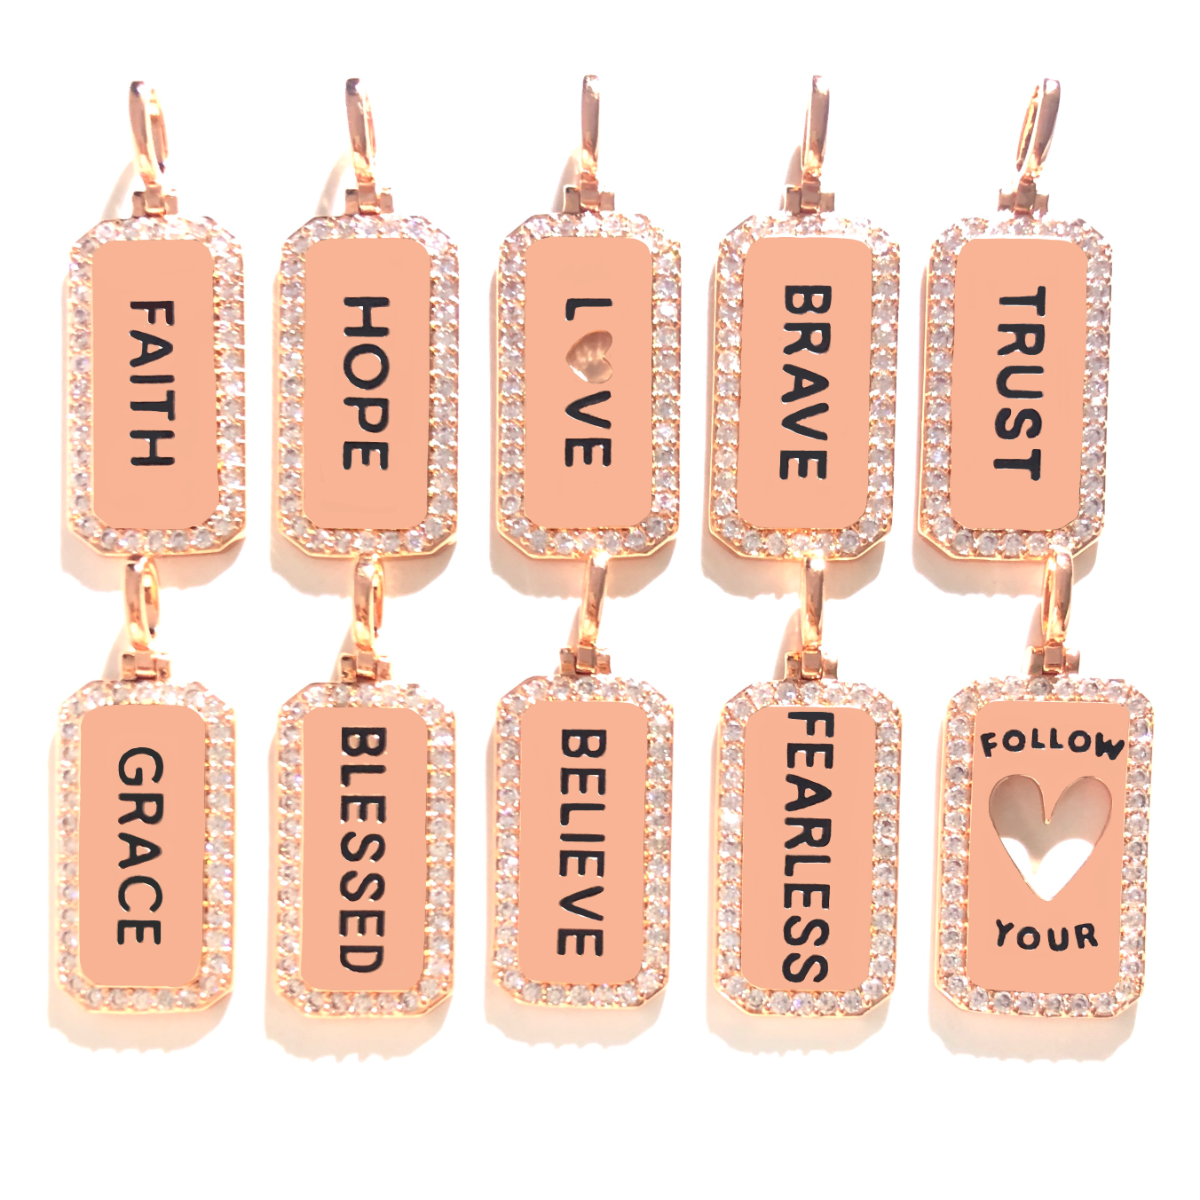 10pcs/lot CZ Paved Faith Hope Love Brave Trust Grace Blessed Believe Fearless Follow Your Heart Word Tags Charms Bundles Rose Gold CZ Paved Charms Christian Quotes Mix Charms New Charms Arrivals Word Tags Charms Beads Beyond